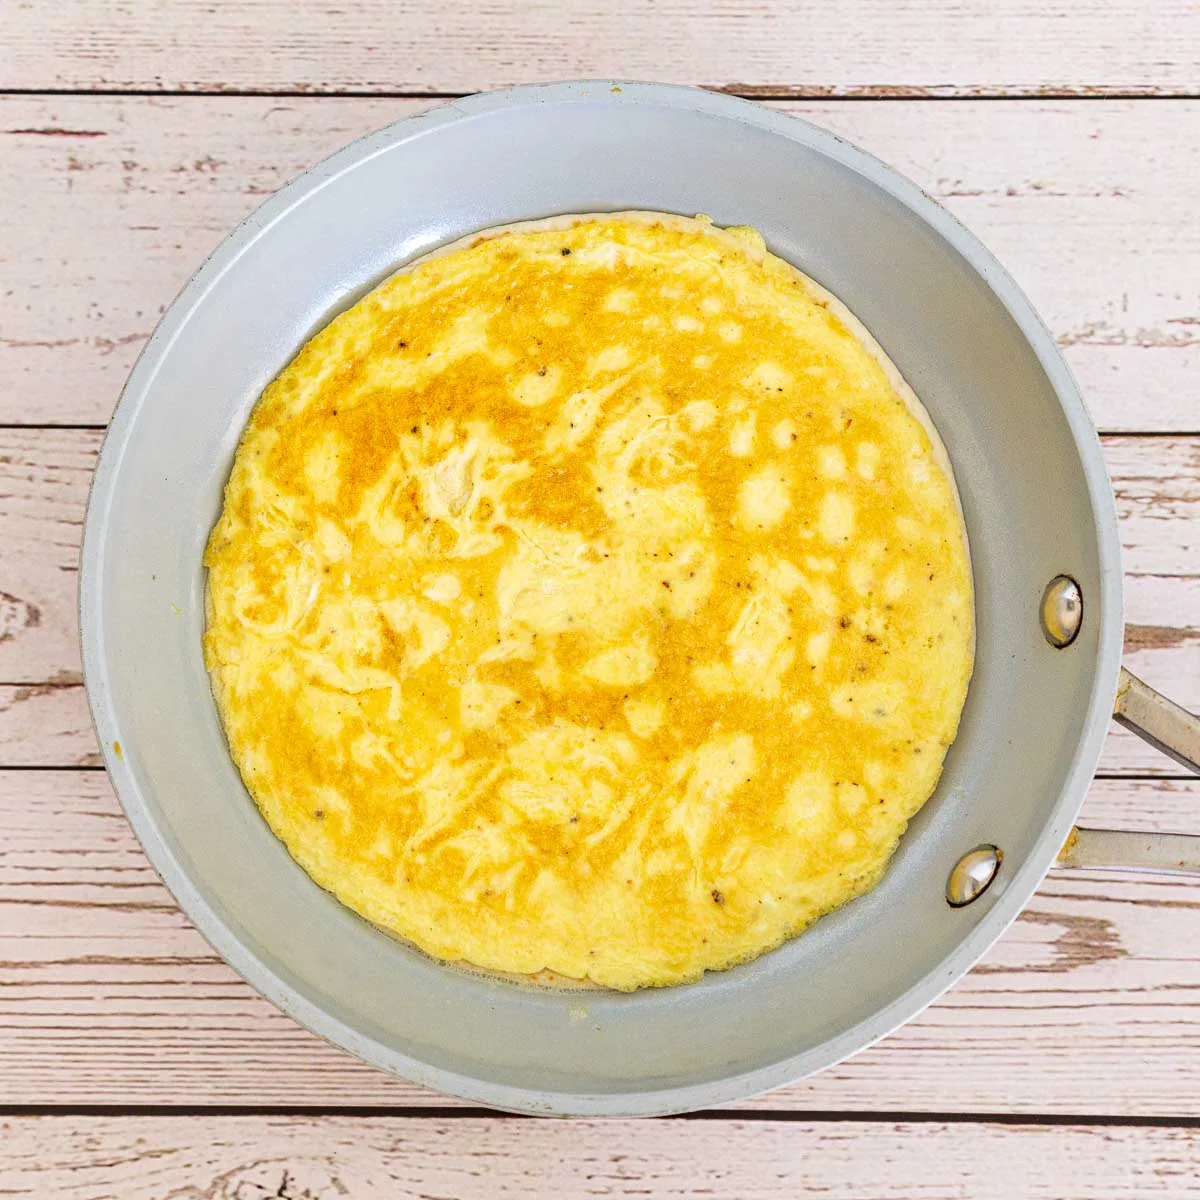 Scrambled egg and tortilla flipped in a pan.